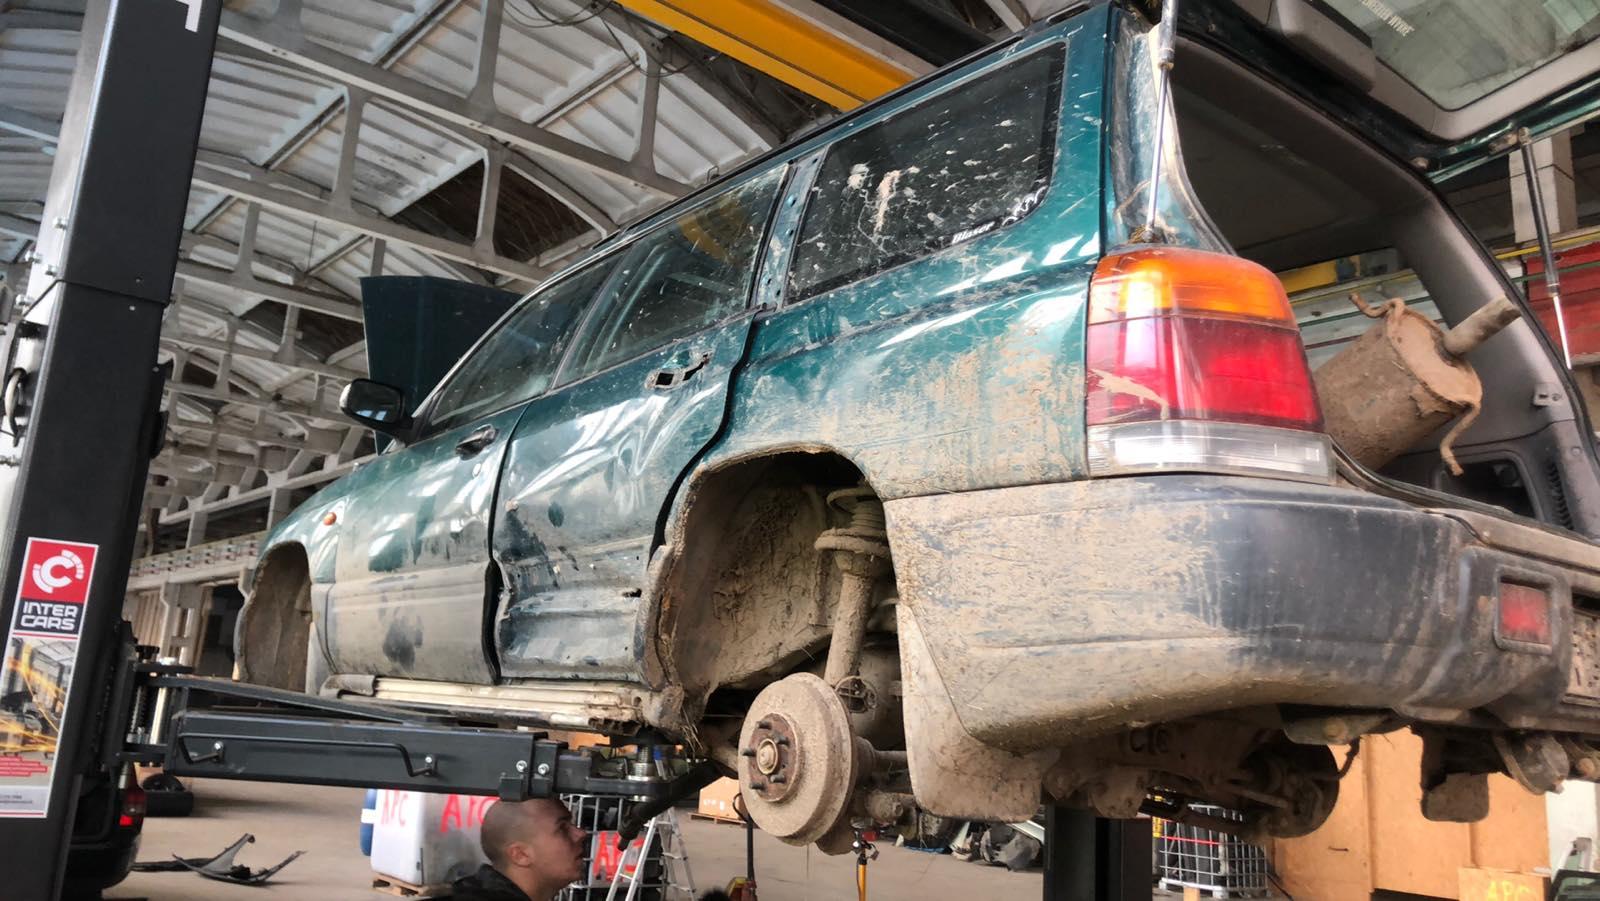 Used Car Parts Subaru FORESTER 1999 2.0 Mechanical Jeep 4/5 d. Green 2020-7-13